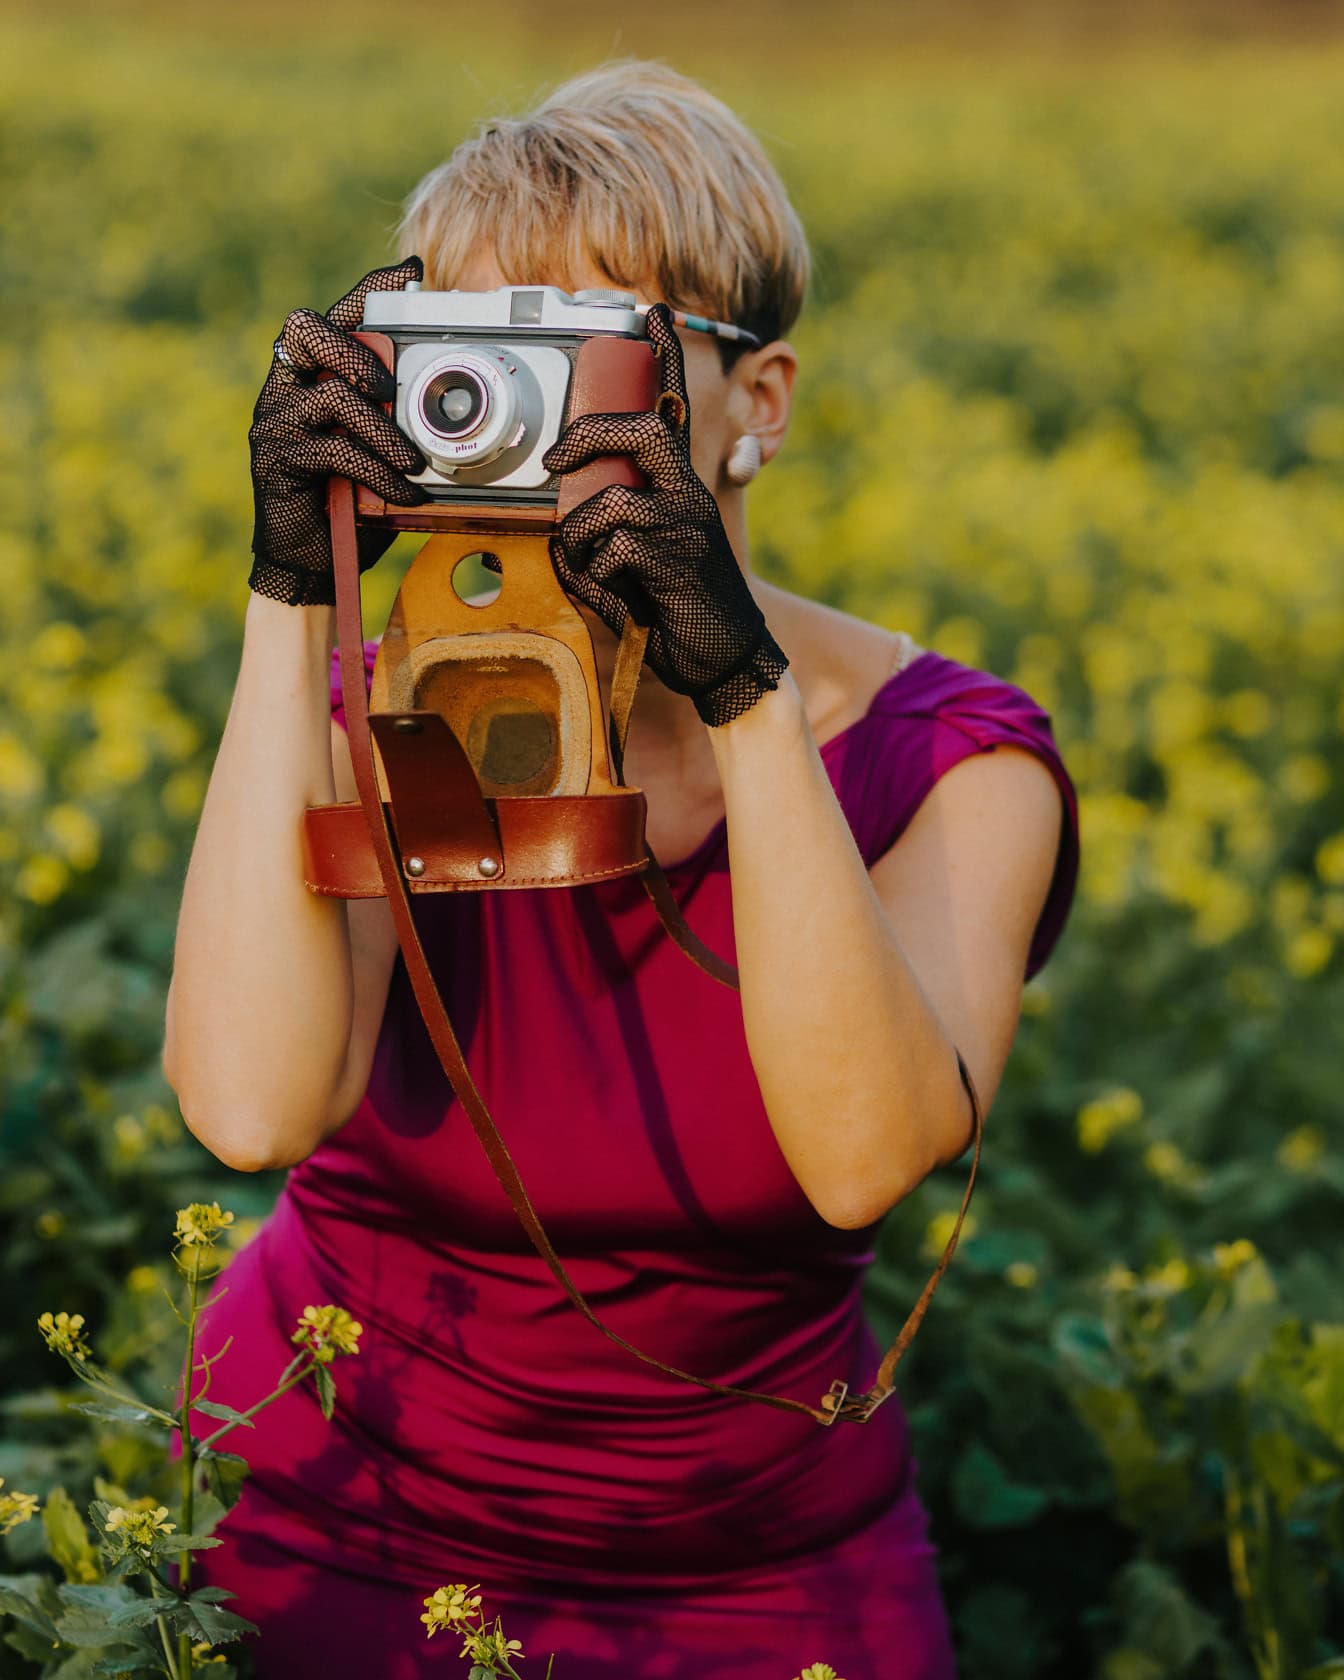 Glamorously dressed blonde photographer holds an analog photo camera with both hands with lace gloves on her hands